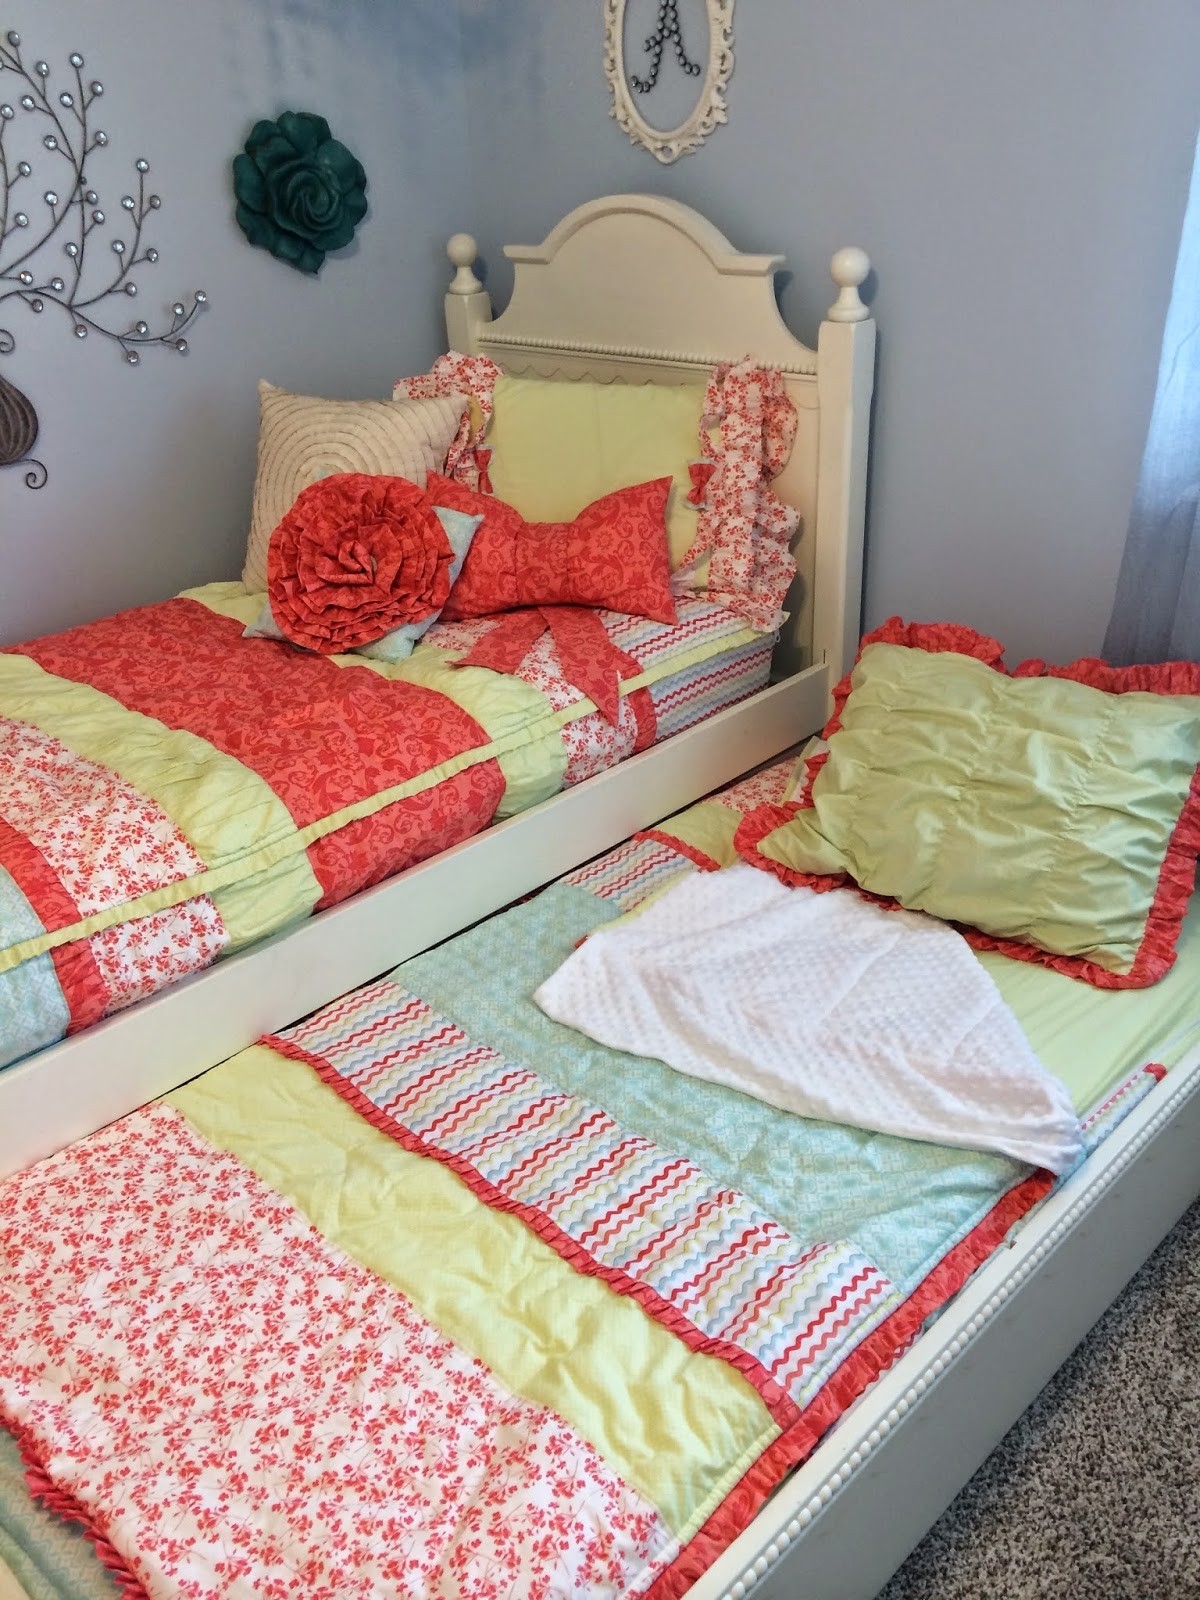 Beddys bed ease trundle beds